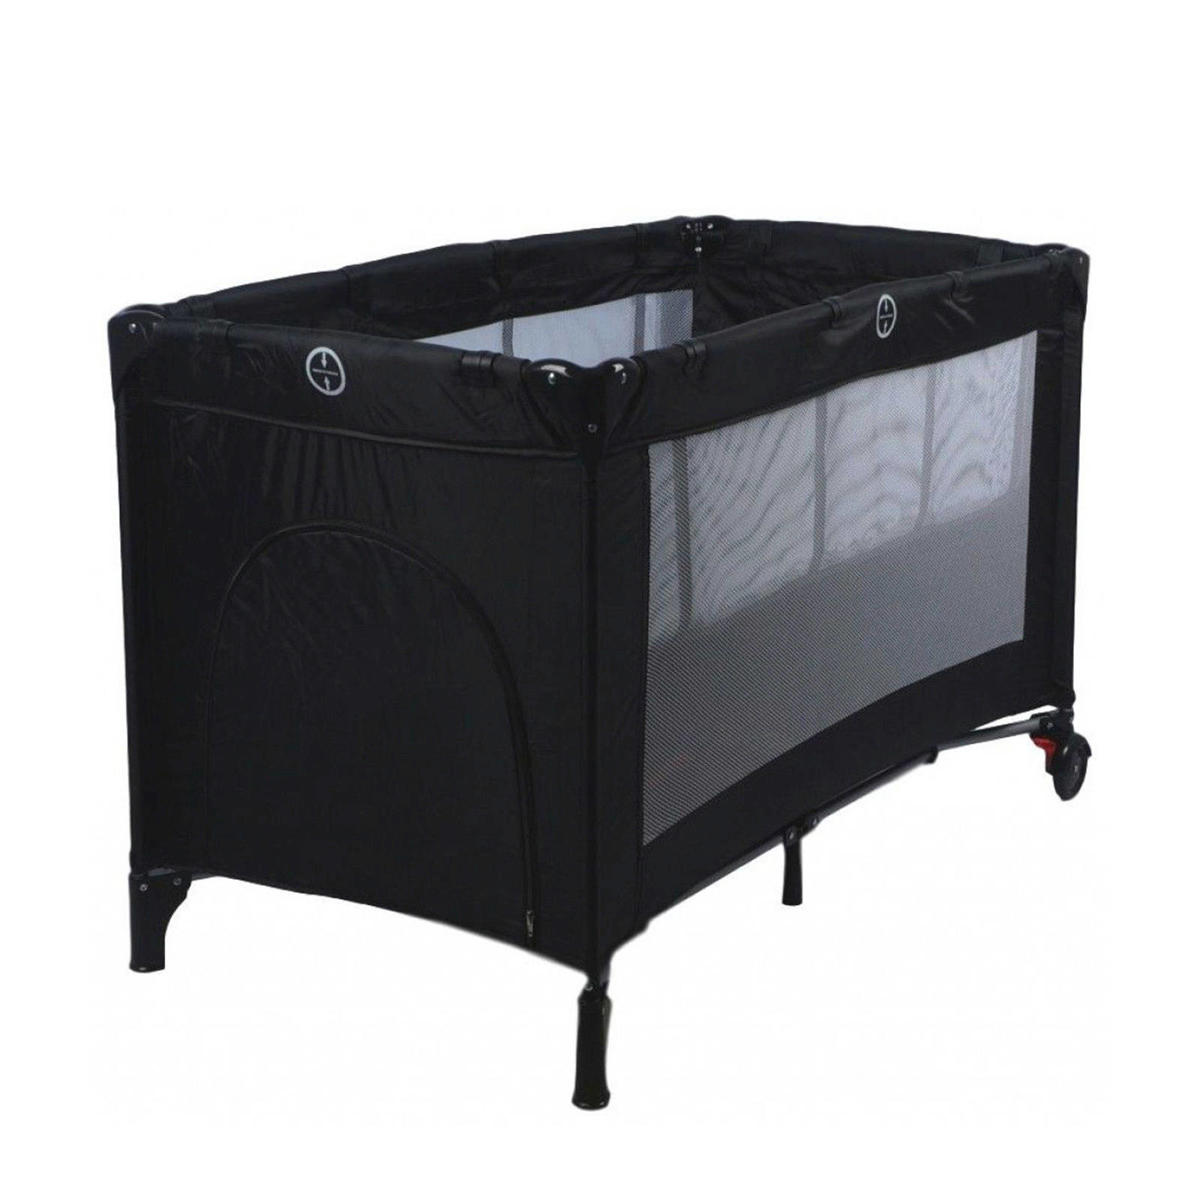 interval gas Spruit Ding Deluxe campingbed - Black | wehkamp